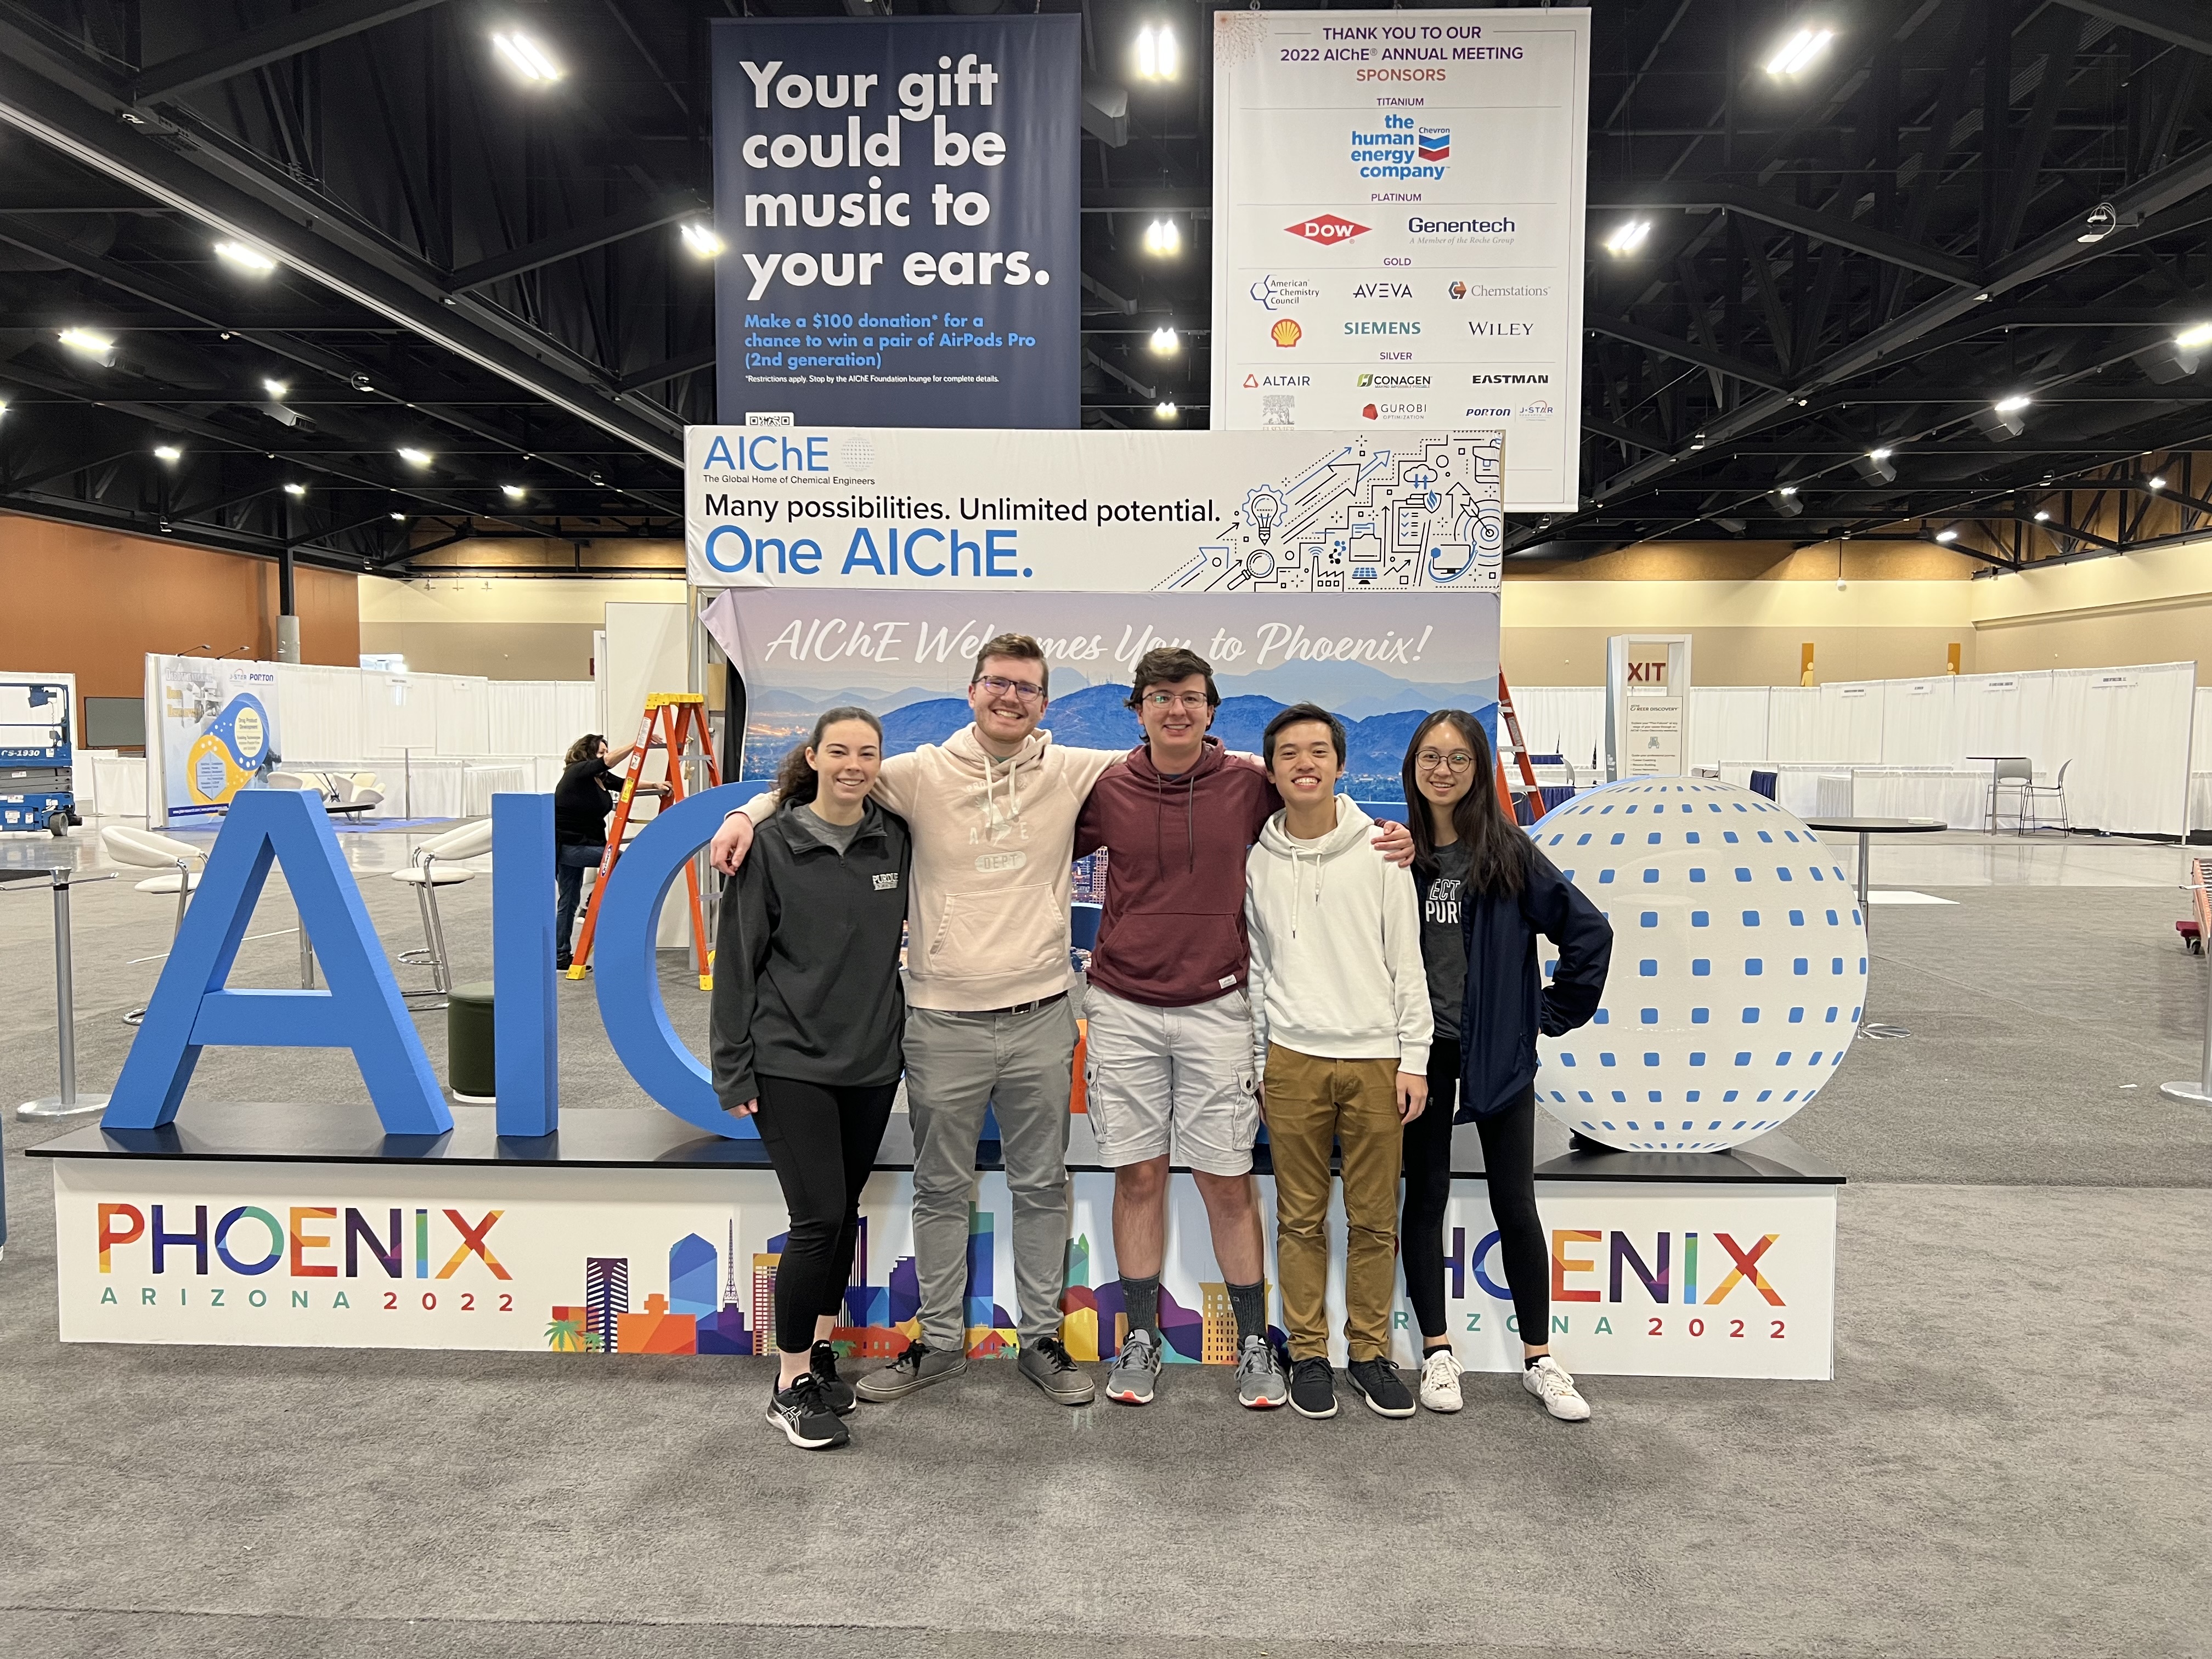 The 2022 nationals team stands in front of the ASC 2022 sign